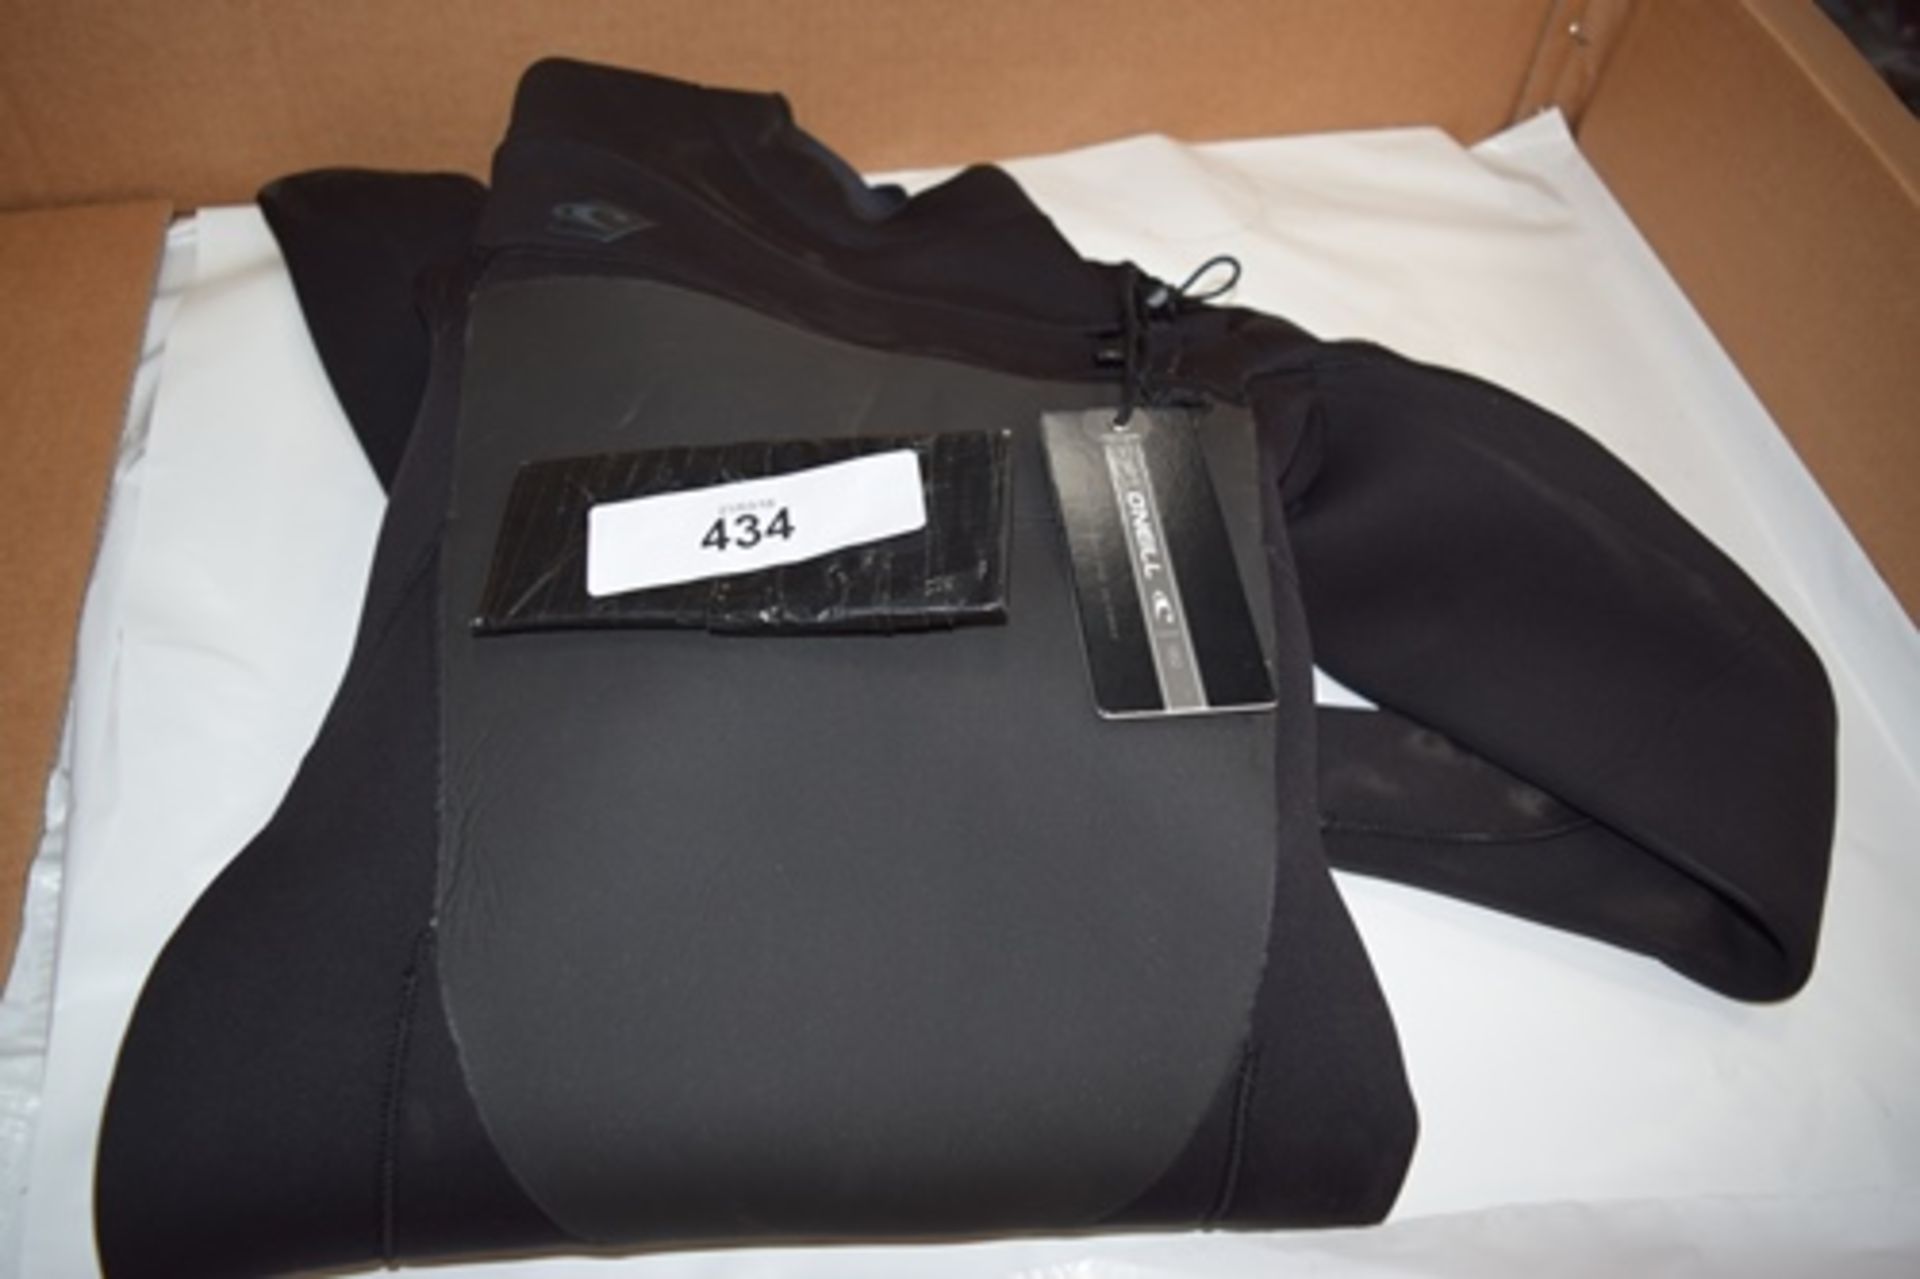 1 x O'Neill 4777 black Superfreak 54 wetsuit, size UK small - New with tags (B27)